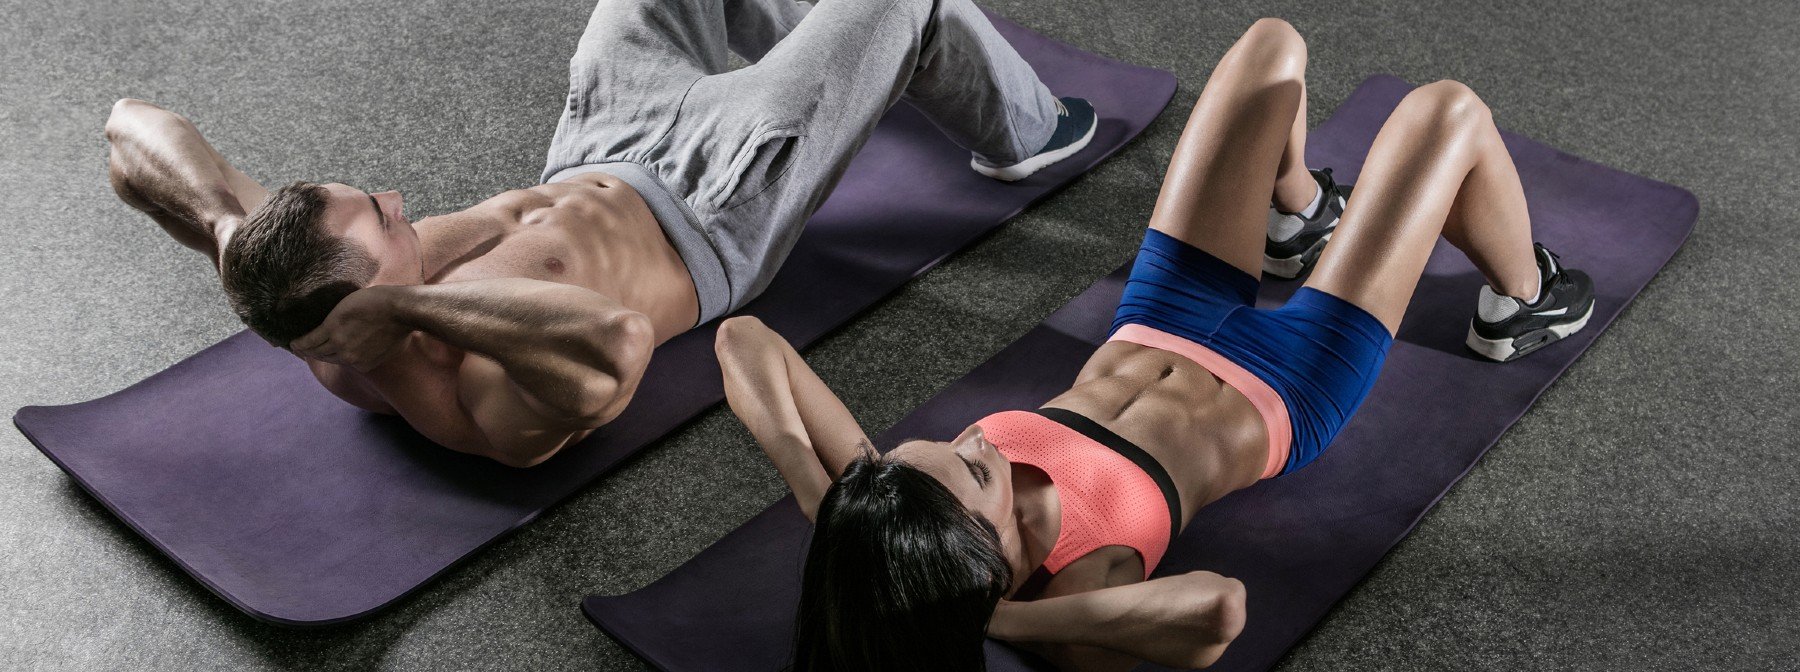 The Abs Exercises You Should Skip If You Have Lower Back Pain